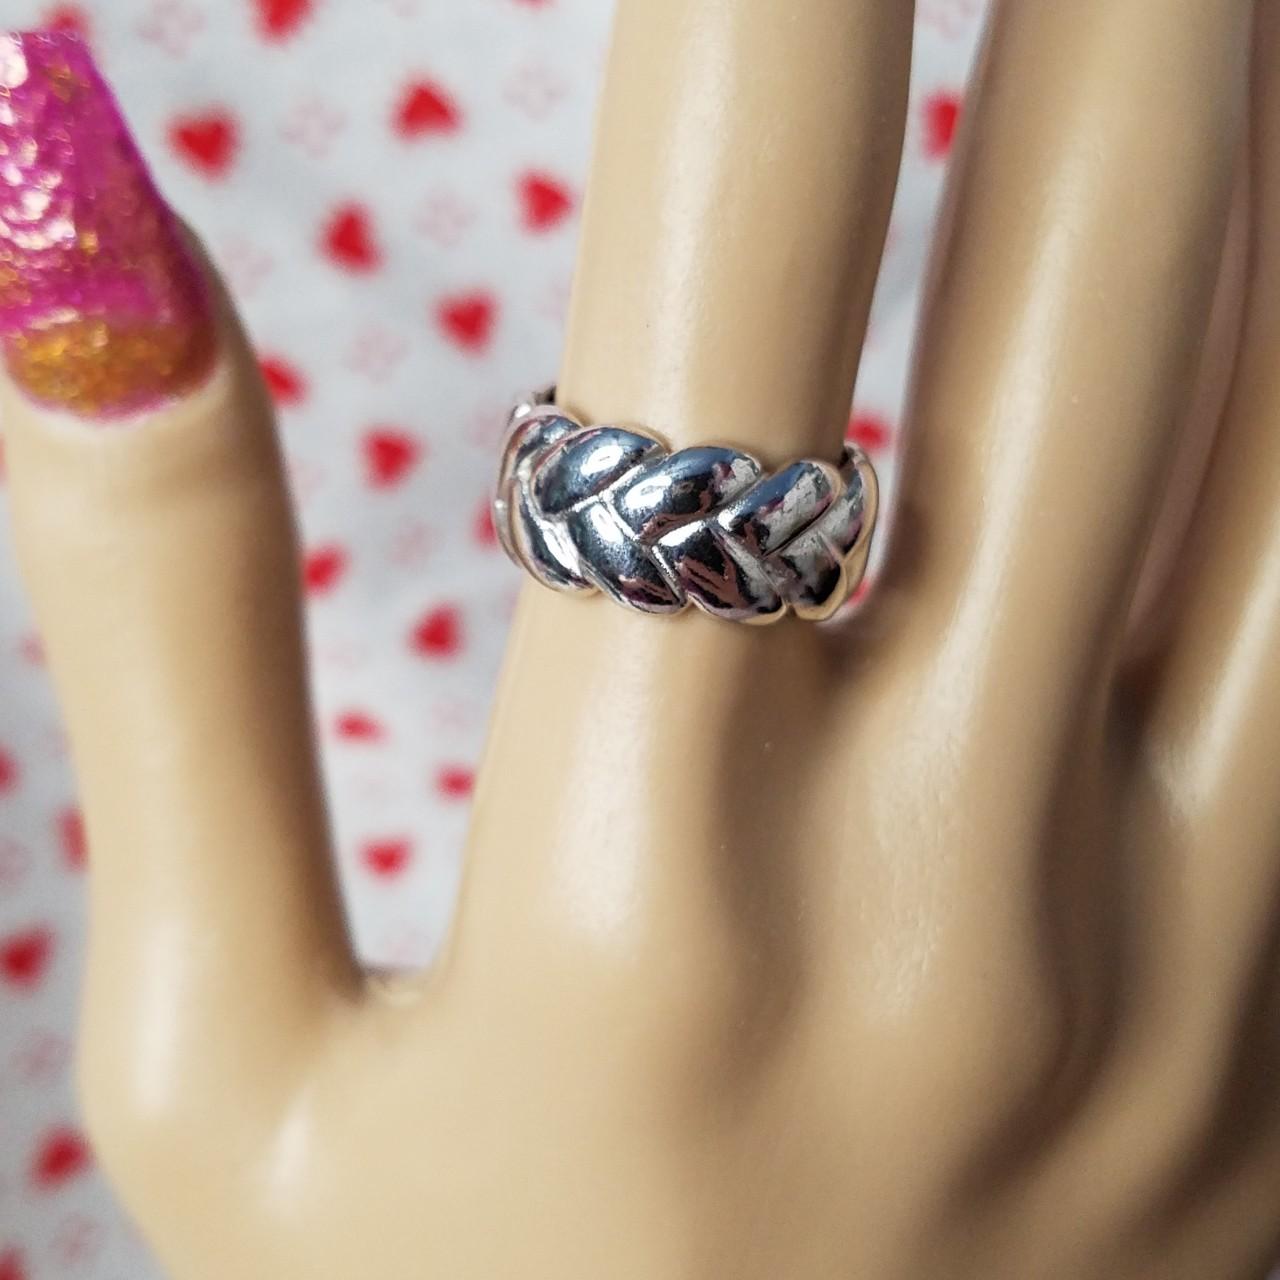 Product Image 1 - Sterling Silver Celtic Knot Ring

This